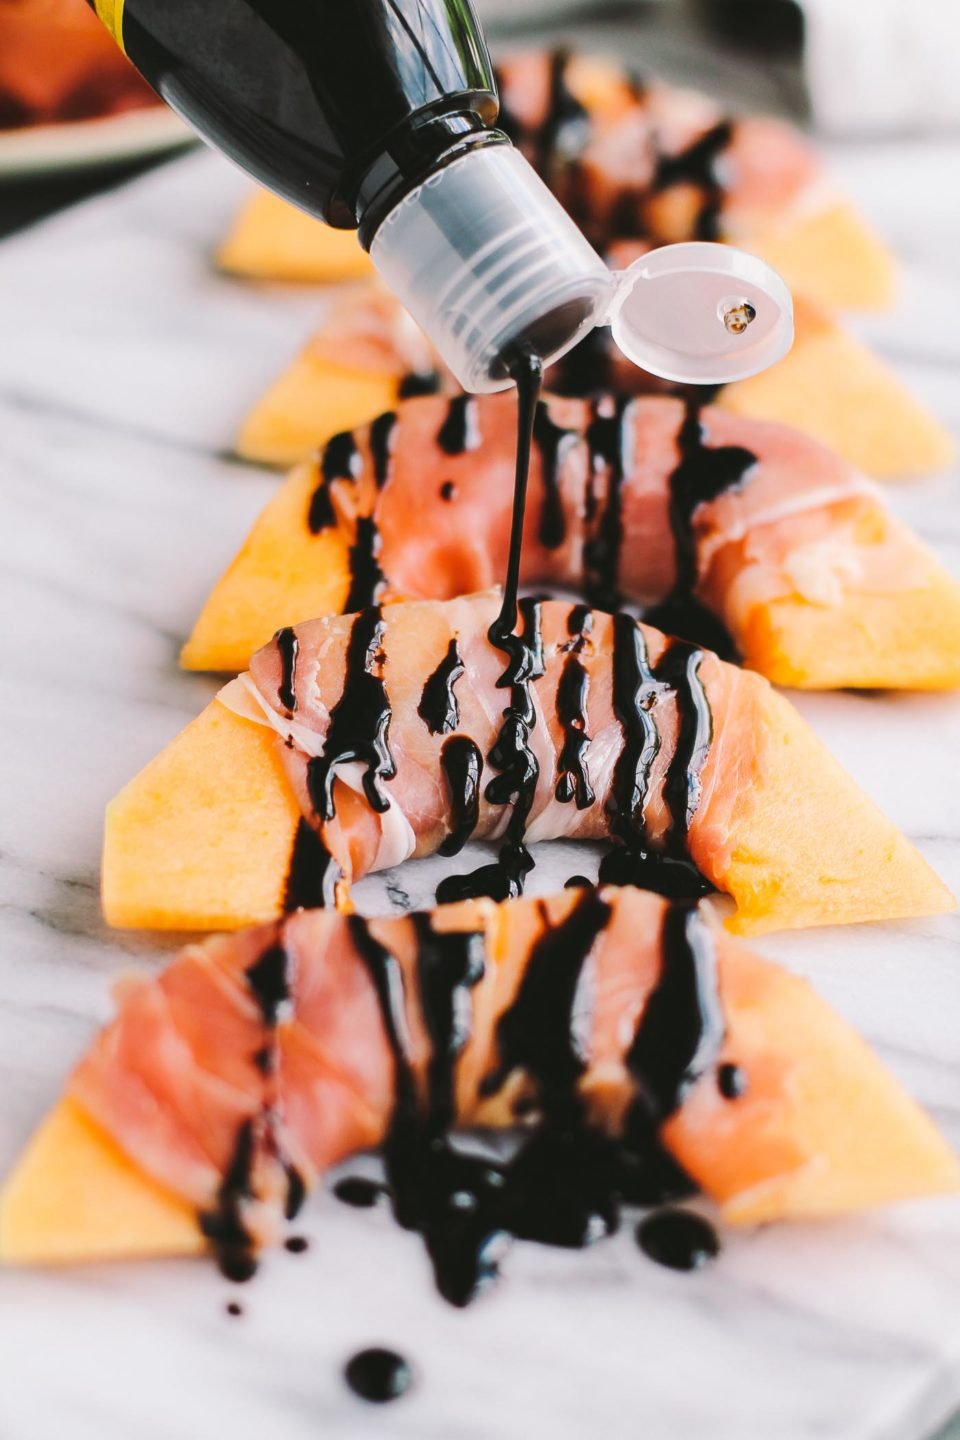 a three-ingredient recipe for prosciutto wrapped cantaloupe topped with balsamic glaze. this appetizer is perfectly balanced, super simple, & most importantly - so delicious! prosciutto-wrapped cantaloupe with balsamic glaze are perfect for summer parties & easy entertaining on hot summer nights. | prosciutto, easy appetizer for a crowd, summer food, summer party, healthy appetizer recipe, make ahead appetizer, girls night recipe, date night recipe |